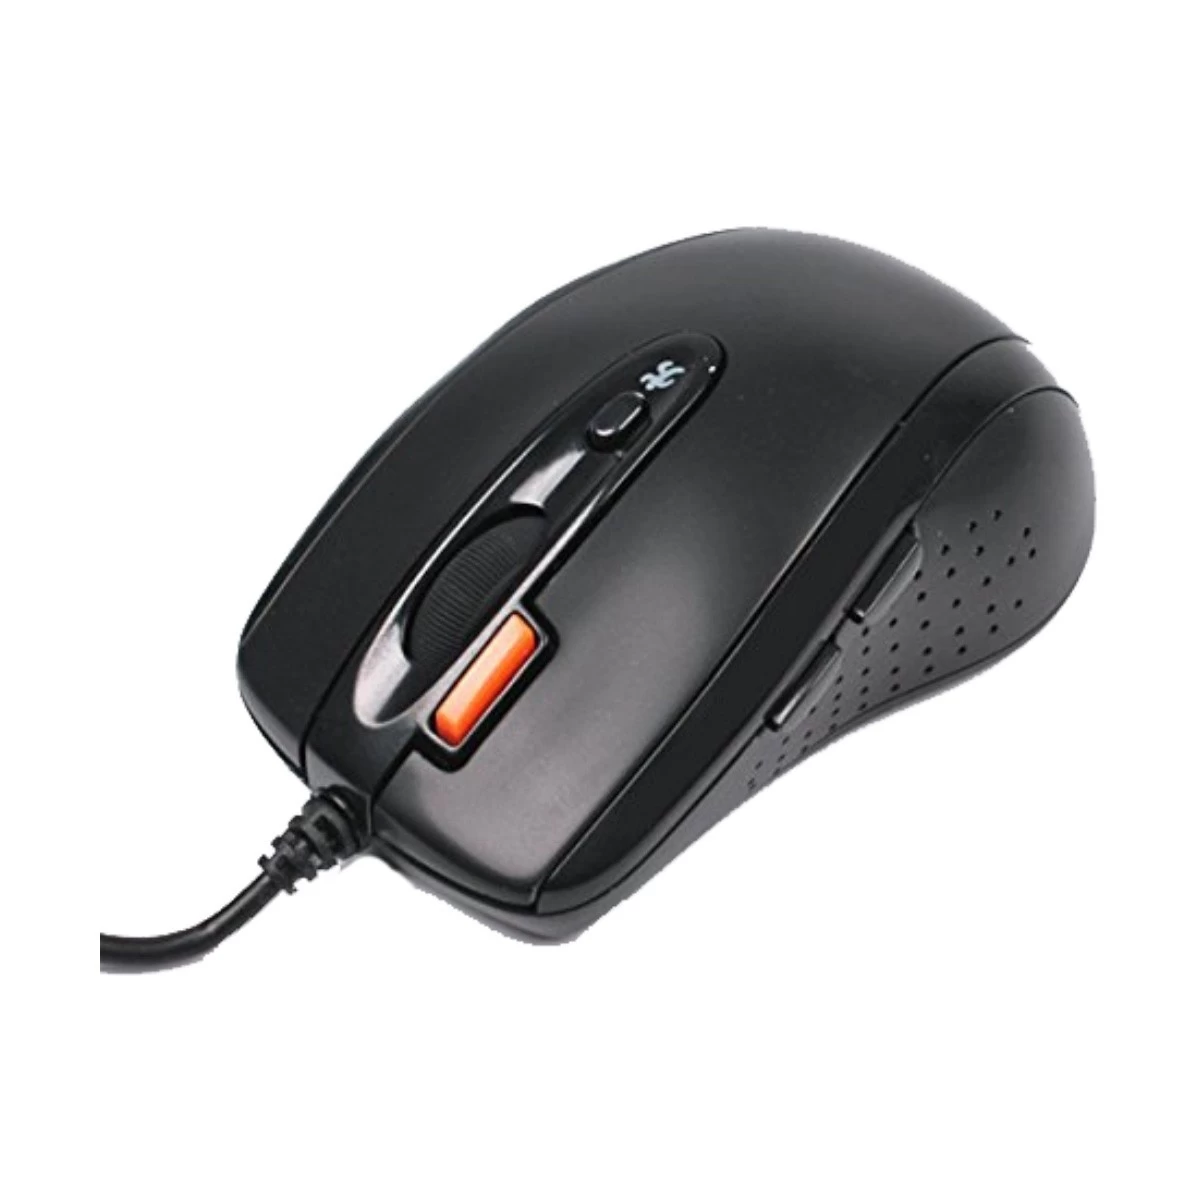 A4Tech USB Port Mouse Driver Download For Windows 10